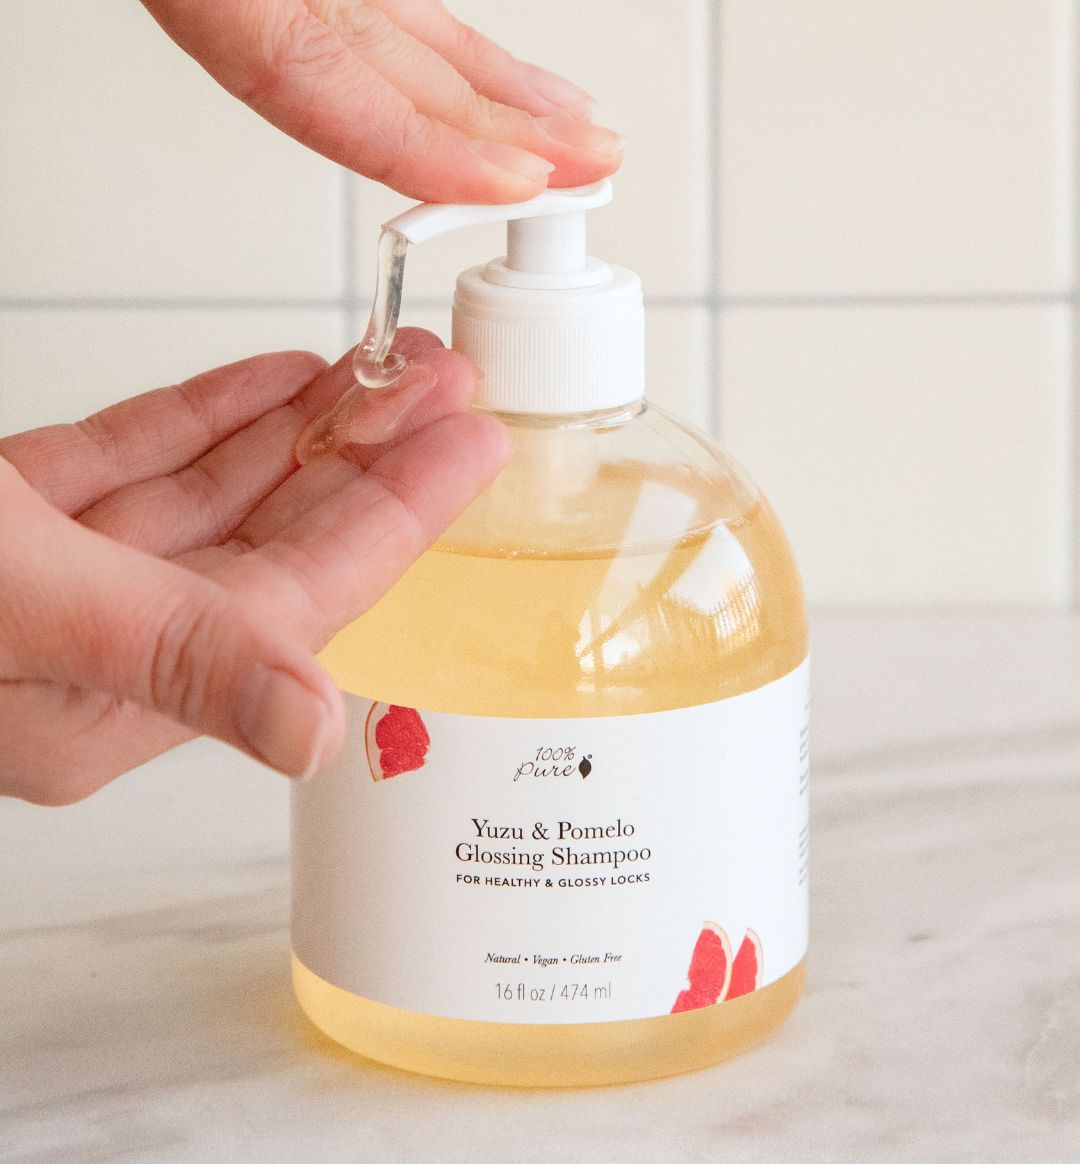 Conquer Your Hair Woes: Discover the Top 5 Natural Shampoo and